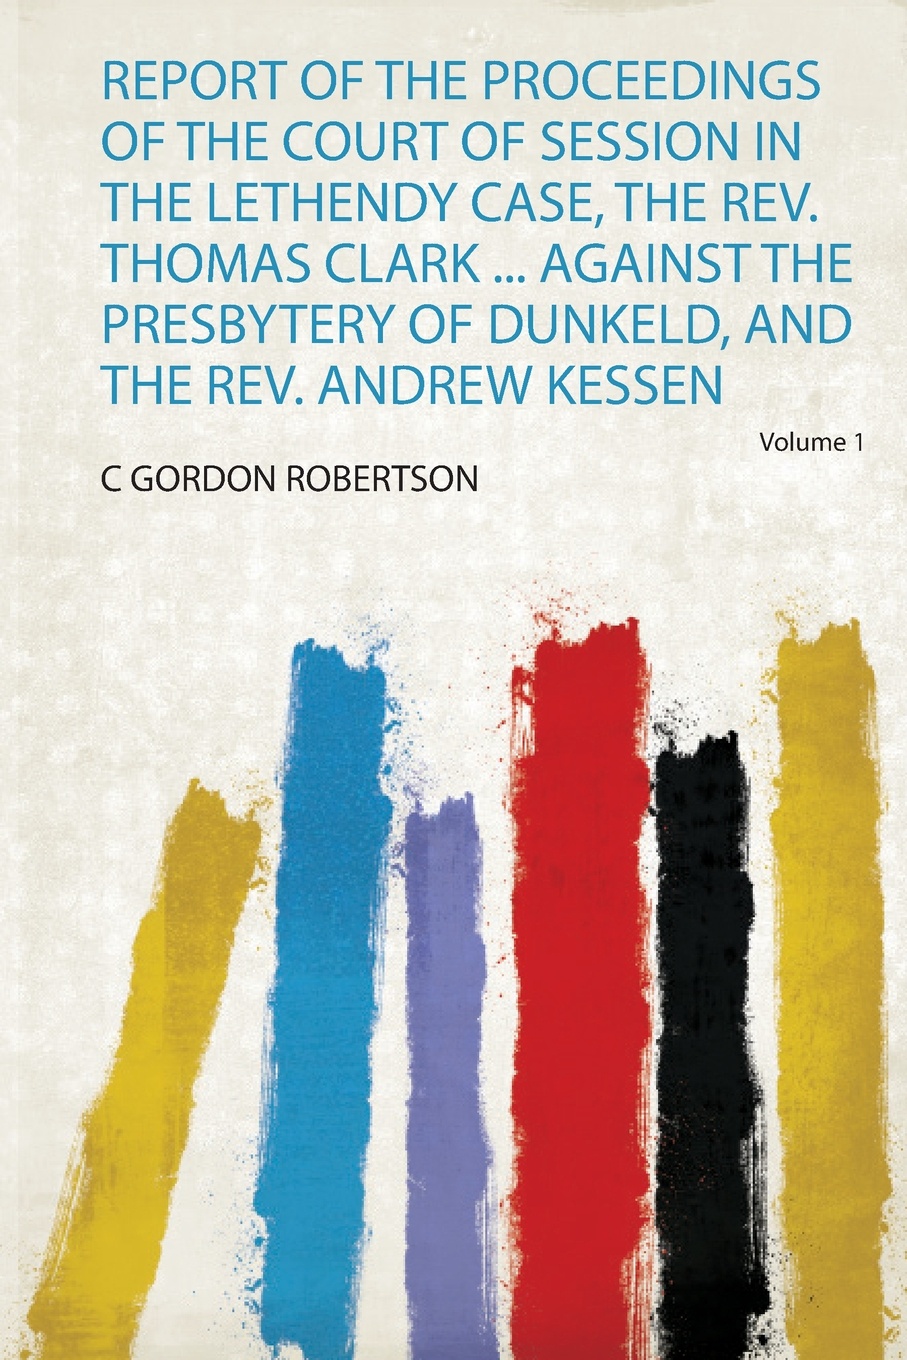 Report of the Proceedings of the Court of Session in the Lethendy Case, the Rev. Thomas Clark ... Against the Presbytery of Dunkeld, and the Rev. Andrew Kessen